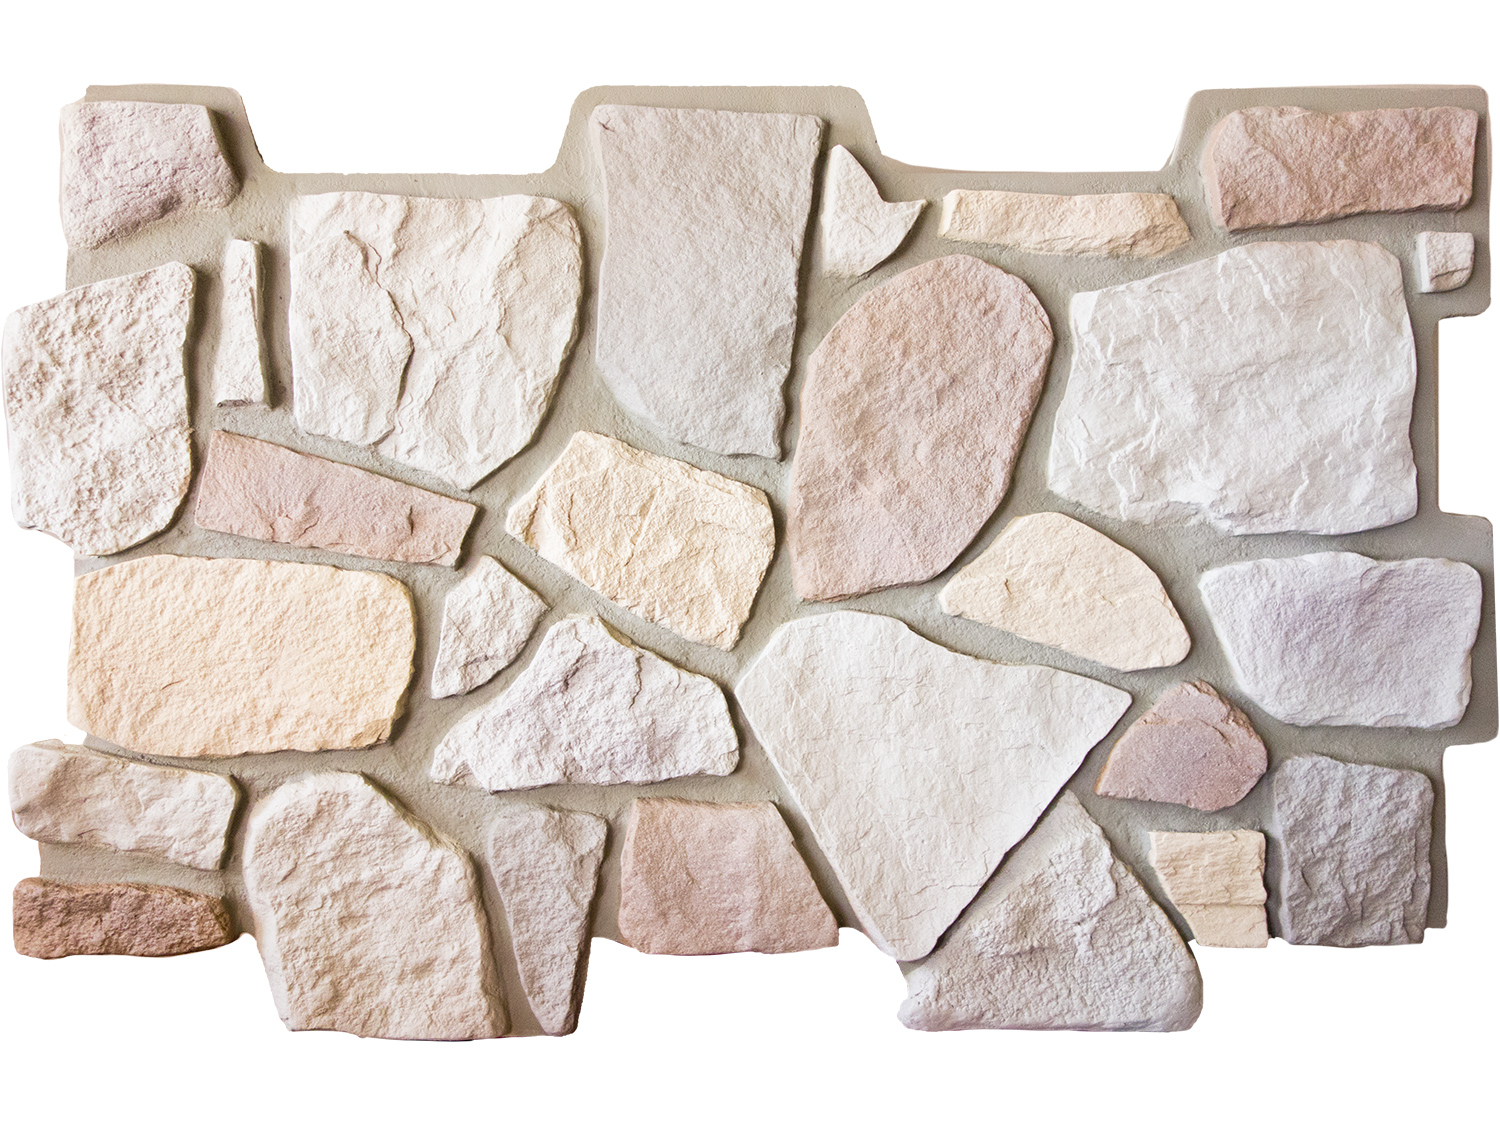 Do the Anson Fieldstone Faux Stone Wall panels have associated corner pieces for outside corners?